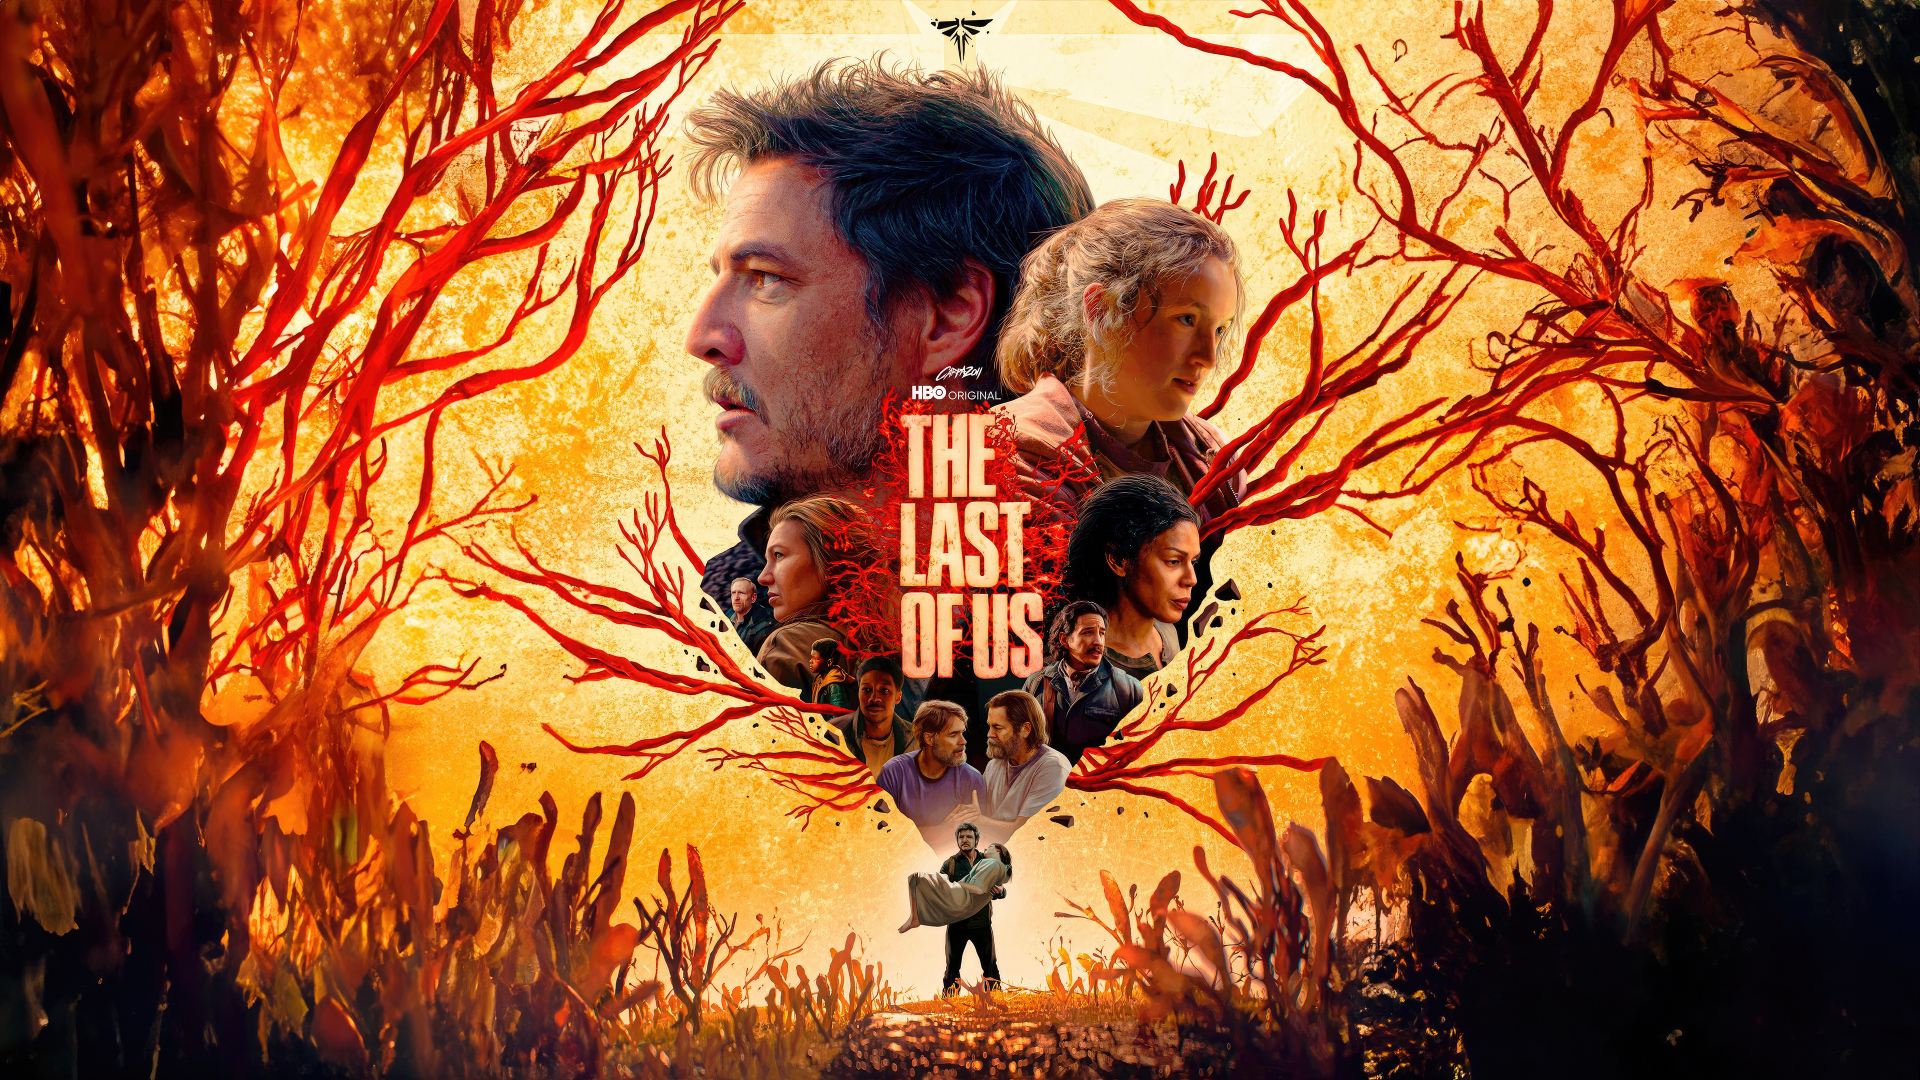 Download wallpaper 1080x1920 game shot, the last of us 2, video game, 1080p  wallpaper, samsung galaxy s4, s5, note, sony xperia z, z1, z2, z3, htc one,  lenovo vibe, google pixel 2